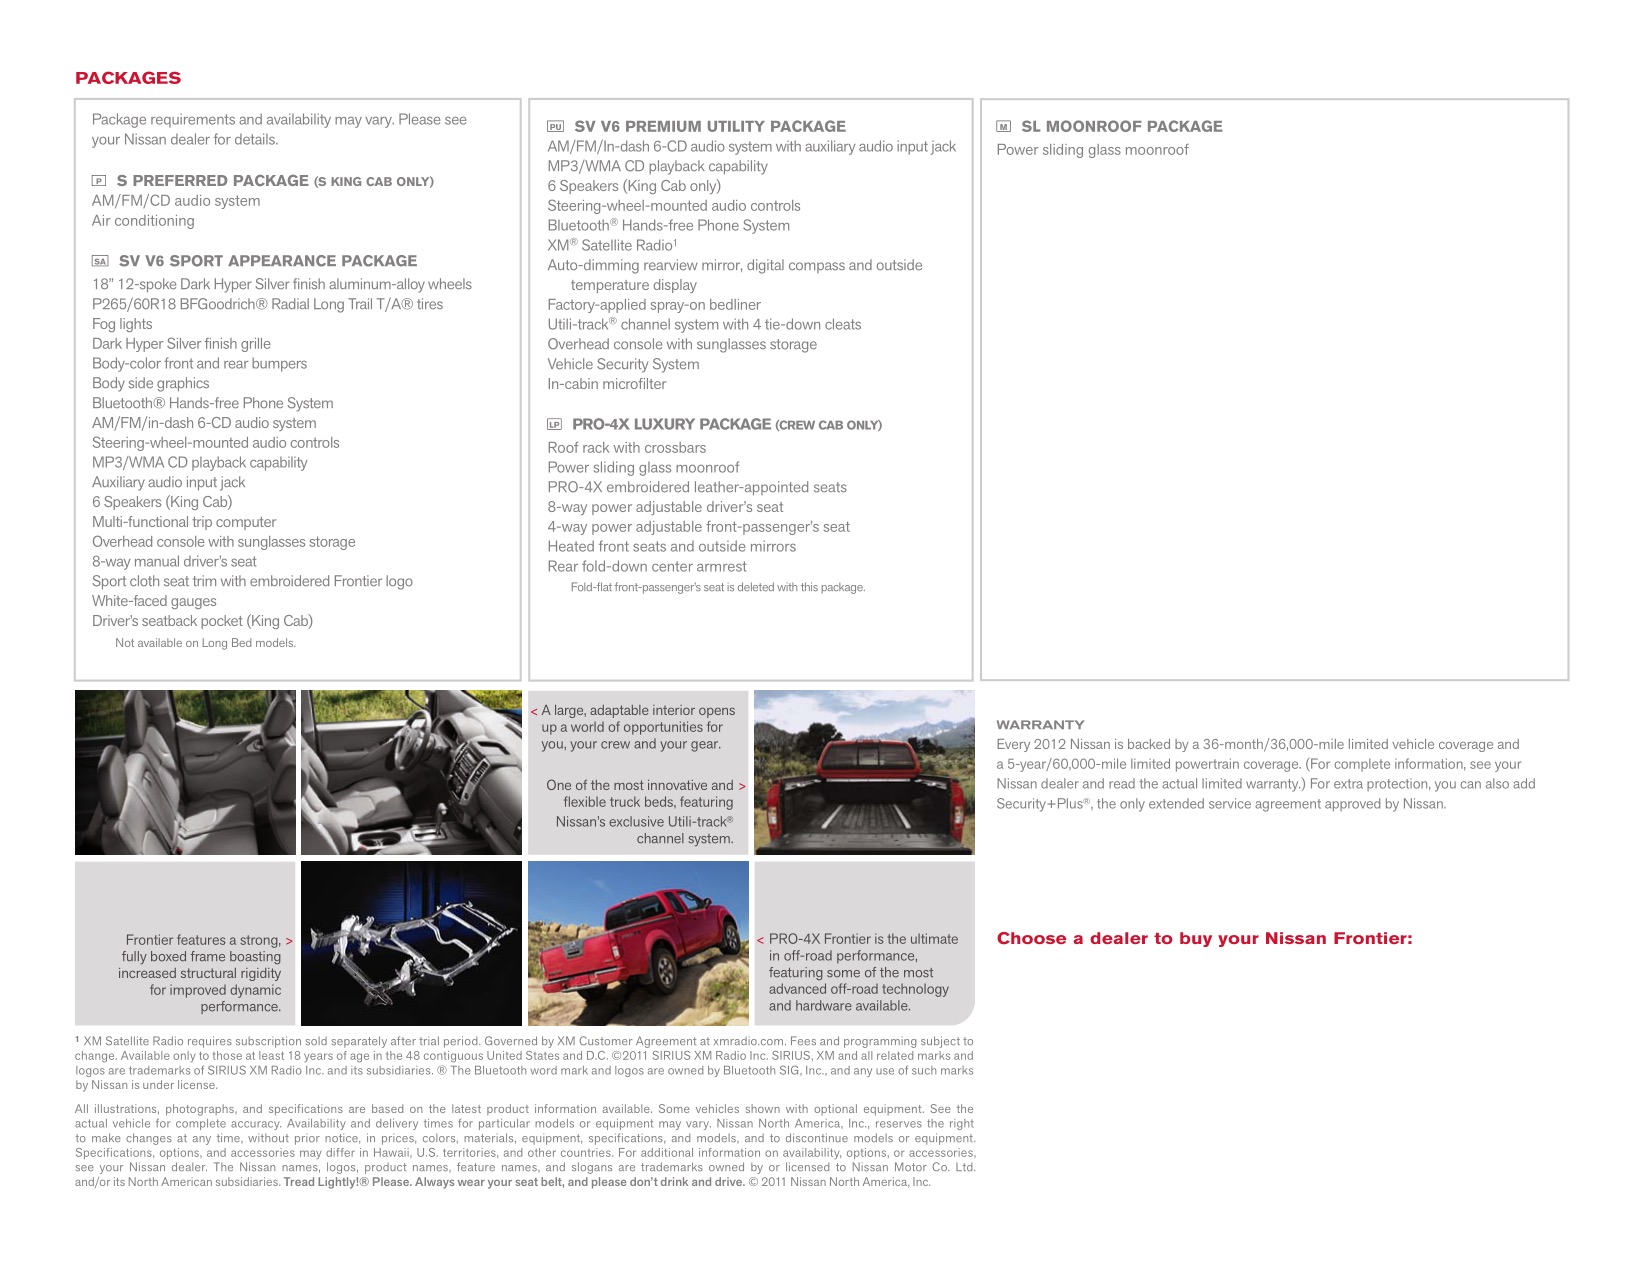 2012 Nissan Frontier Brochure Page 3